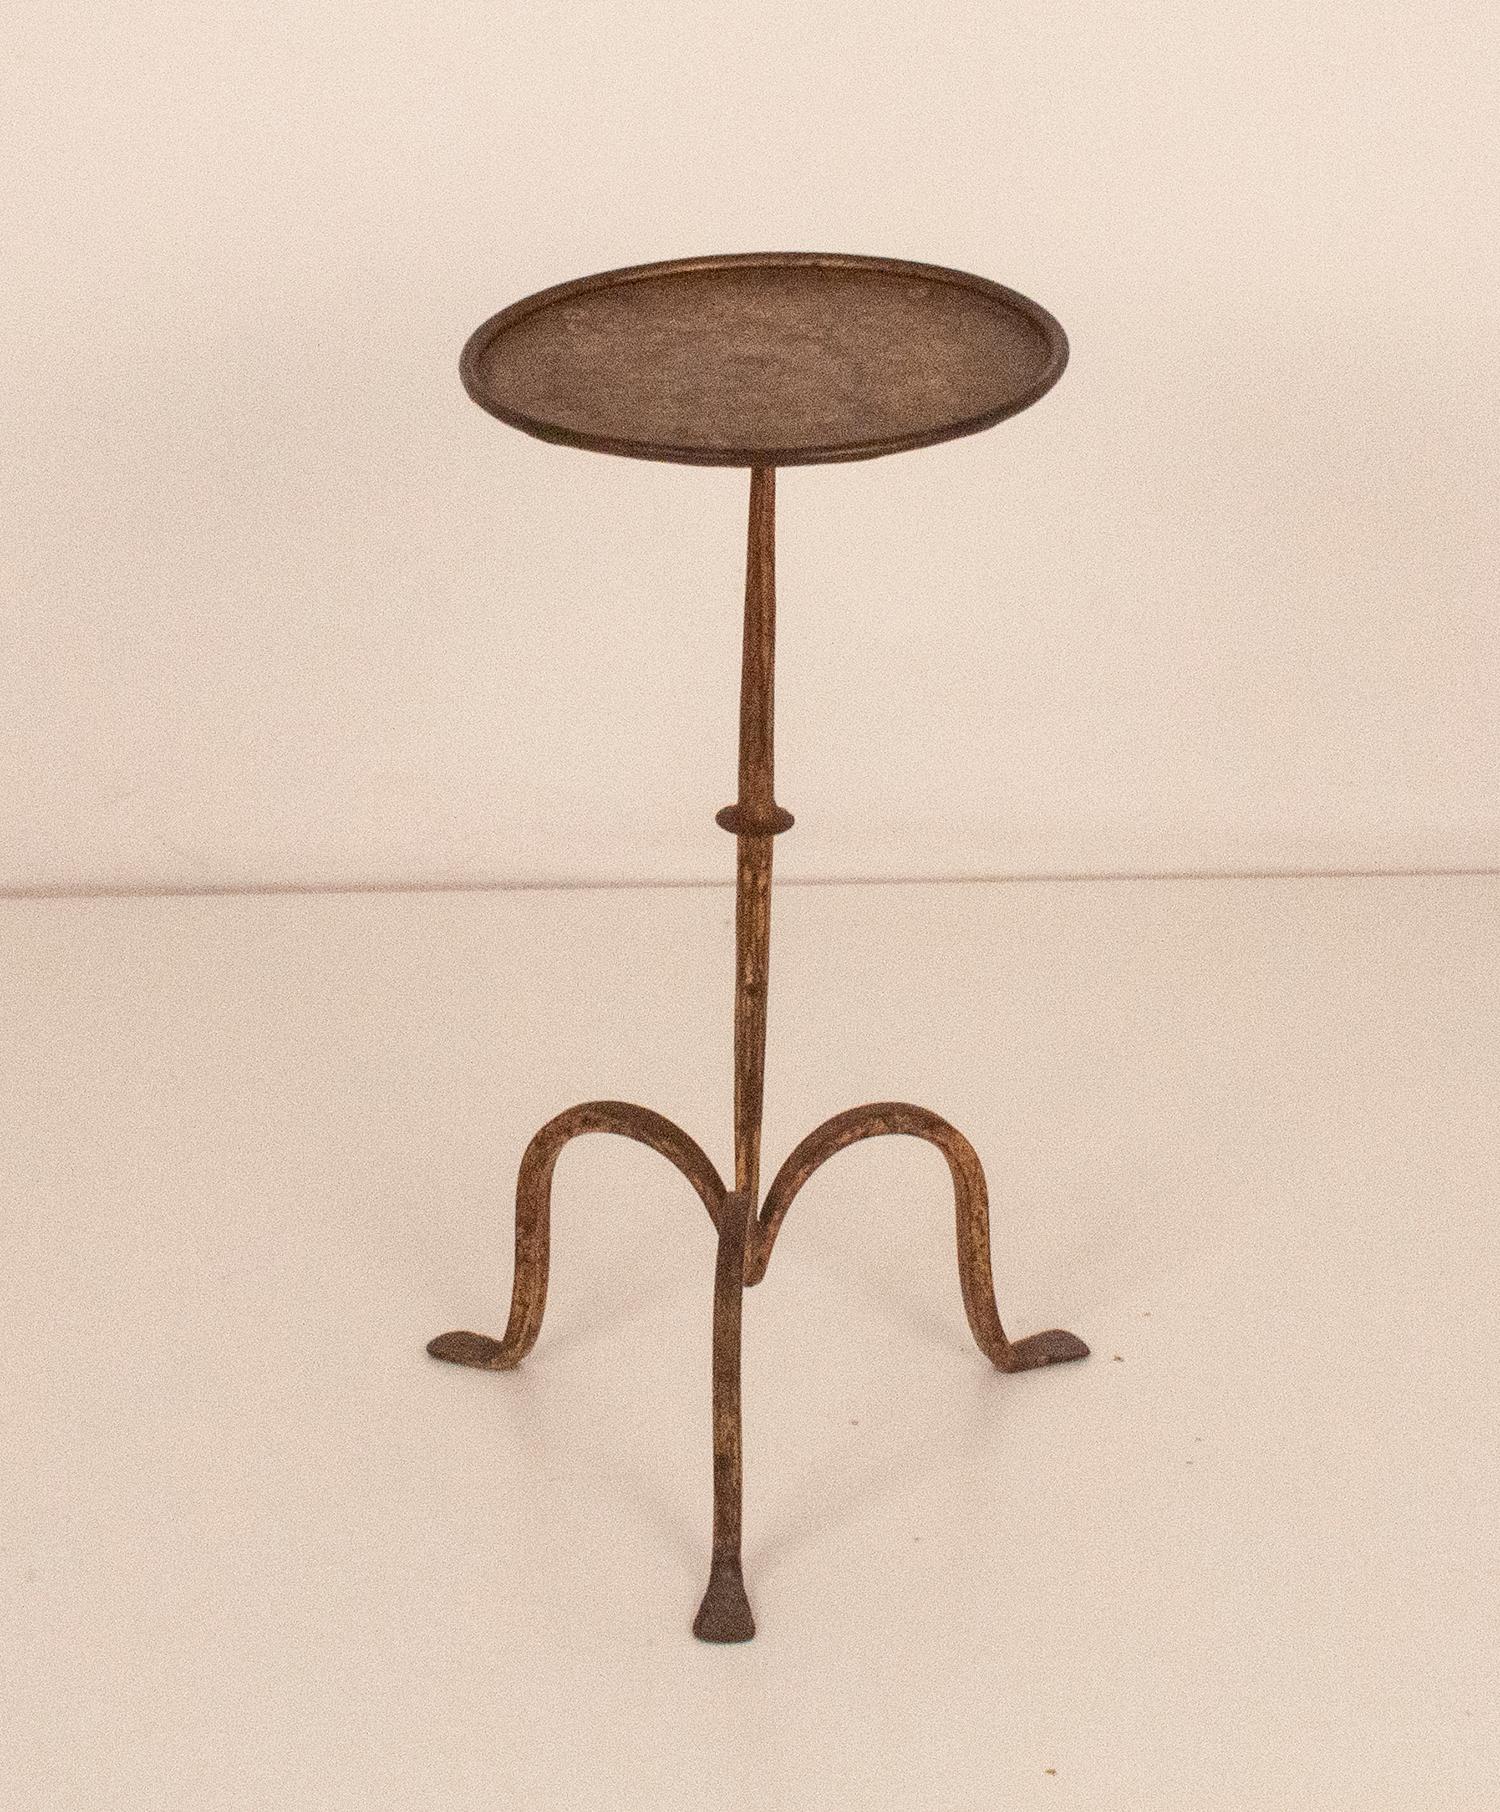 Nice hand-hammered gilt patinated occasional table or martini table with three-footed looped base, Spain, 1940-1950s.
It can be used as a drink table, end table, coffee table.
Very versatile table.